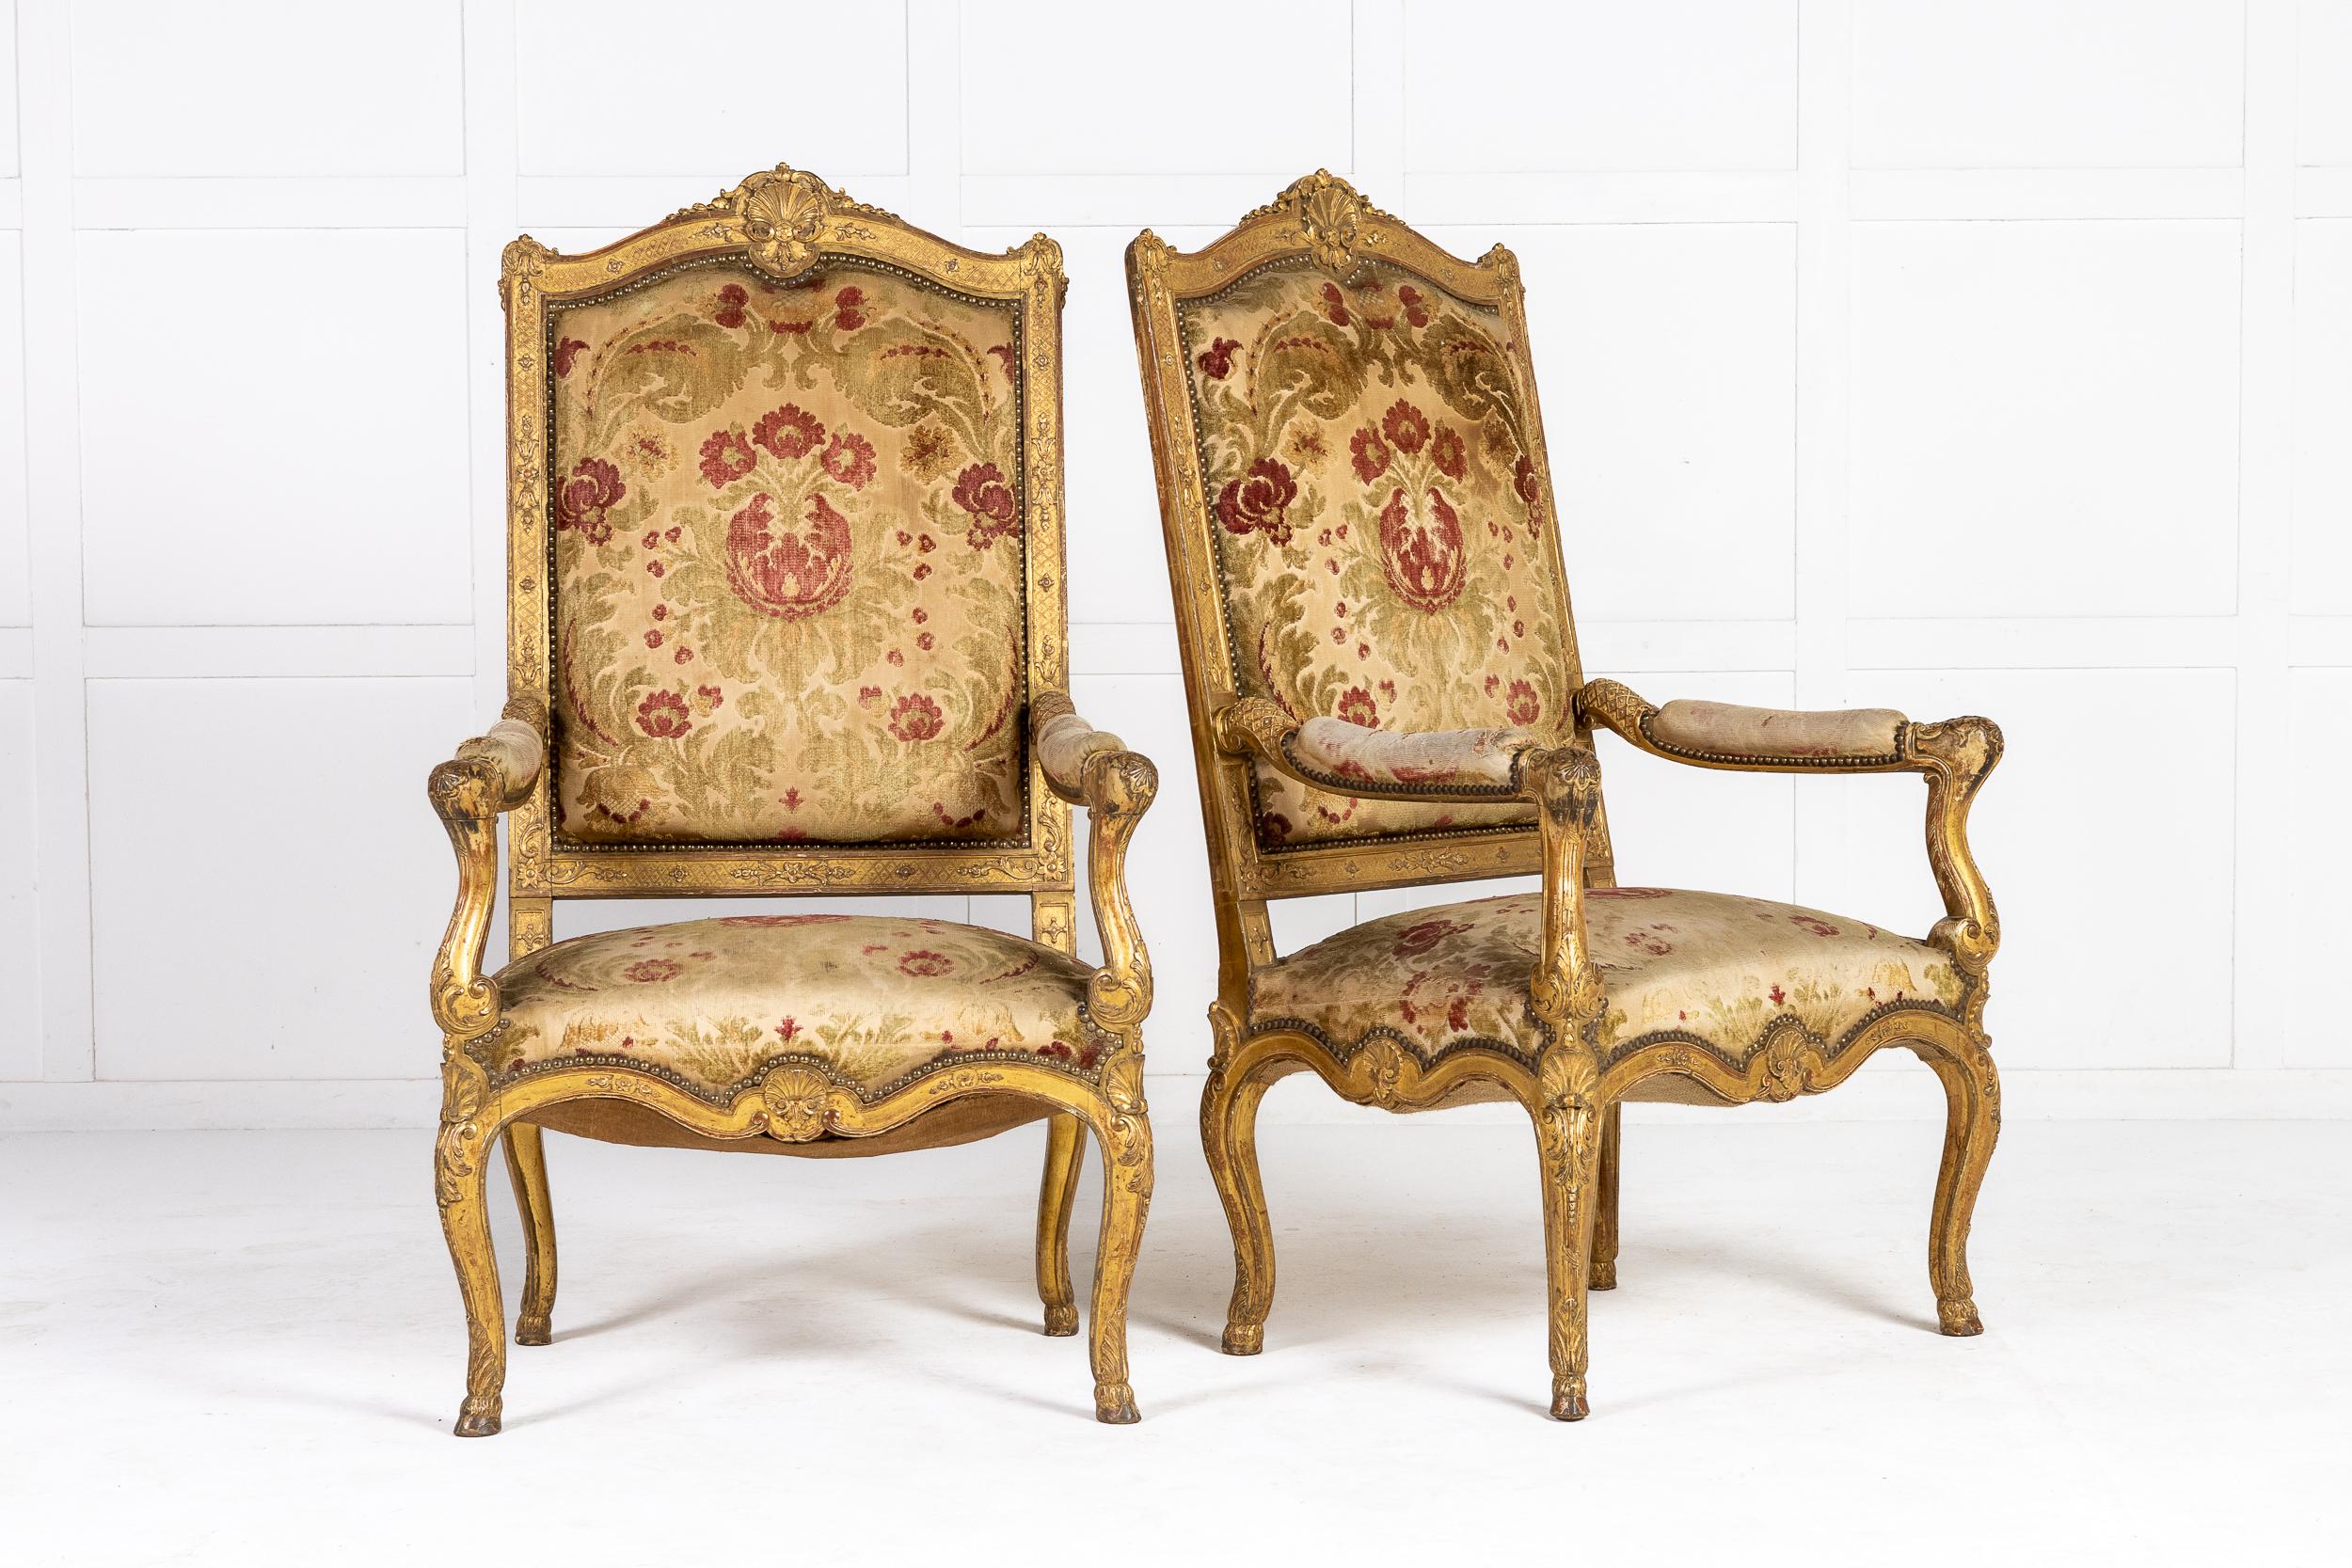 An Exeptional pair of French Regence Style giltwood armchairs c.1900

The chairs with upholstered seats, backs and arm pads with show frames centred on a finely carved shell on the crest rail. The front, back and side seat rails all serpentine with